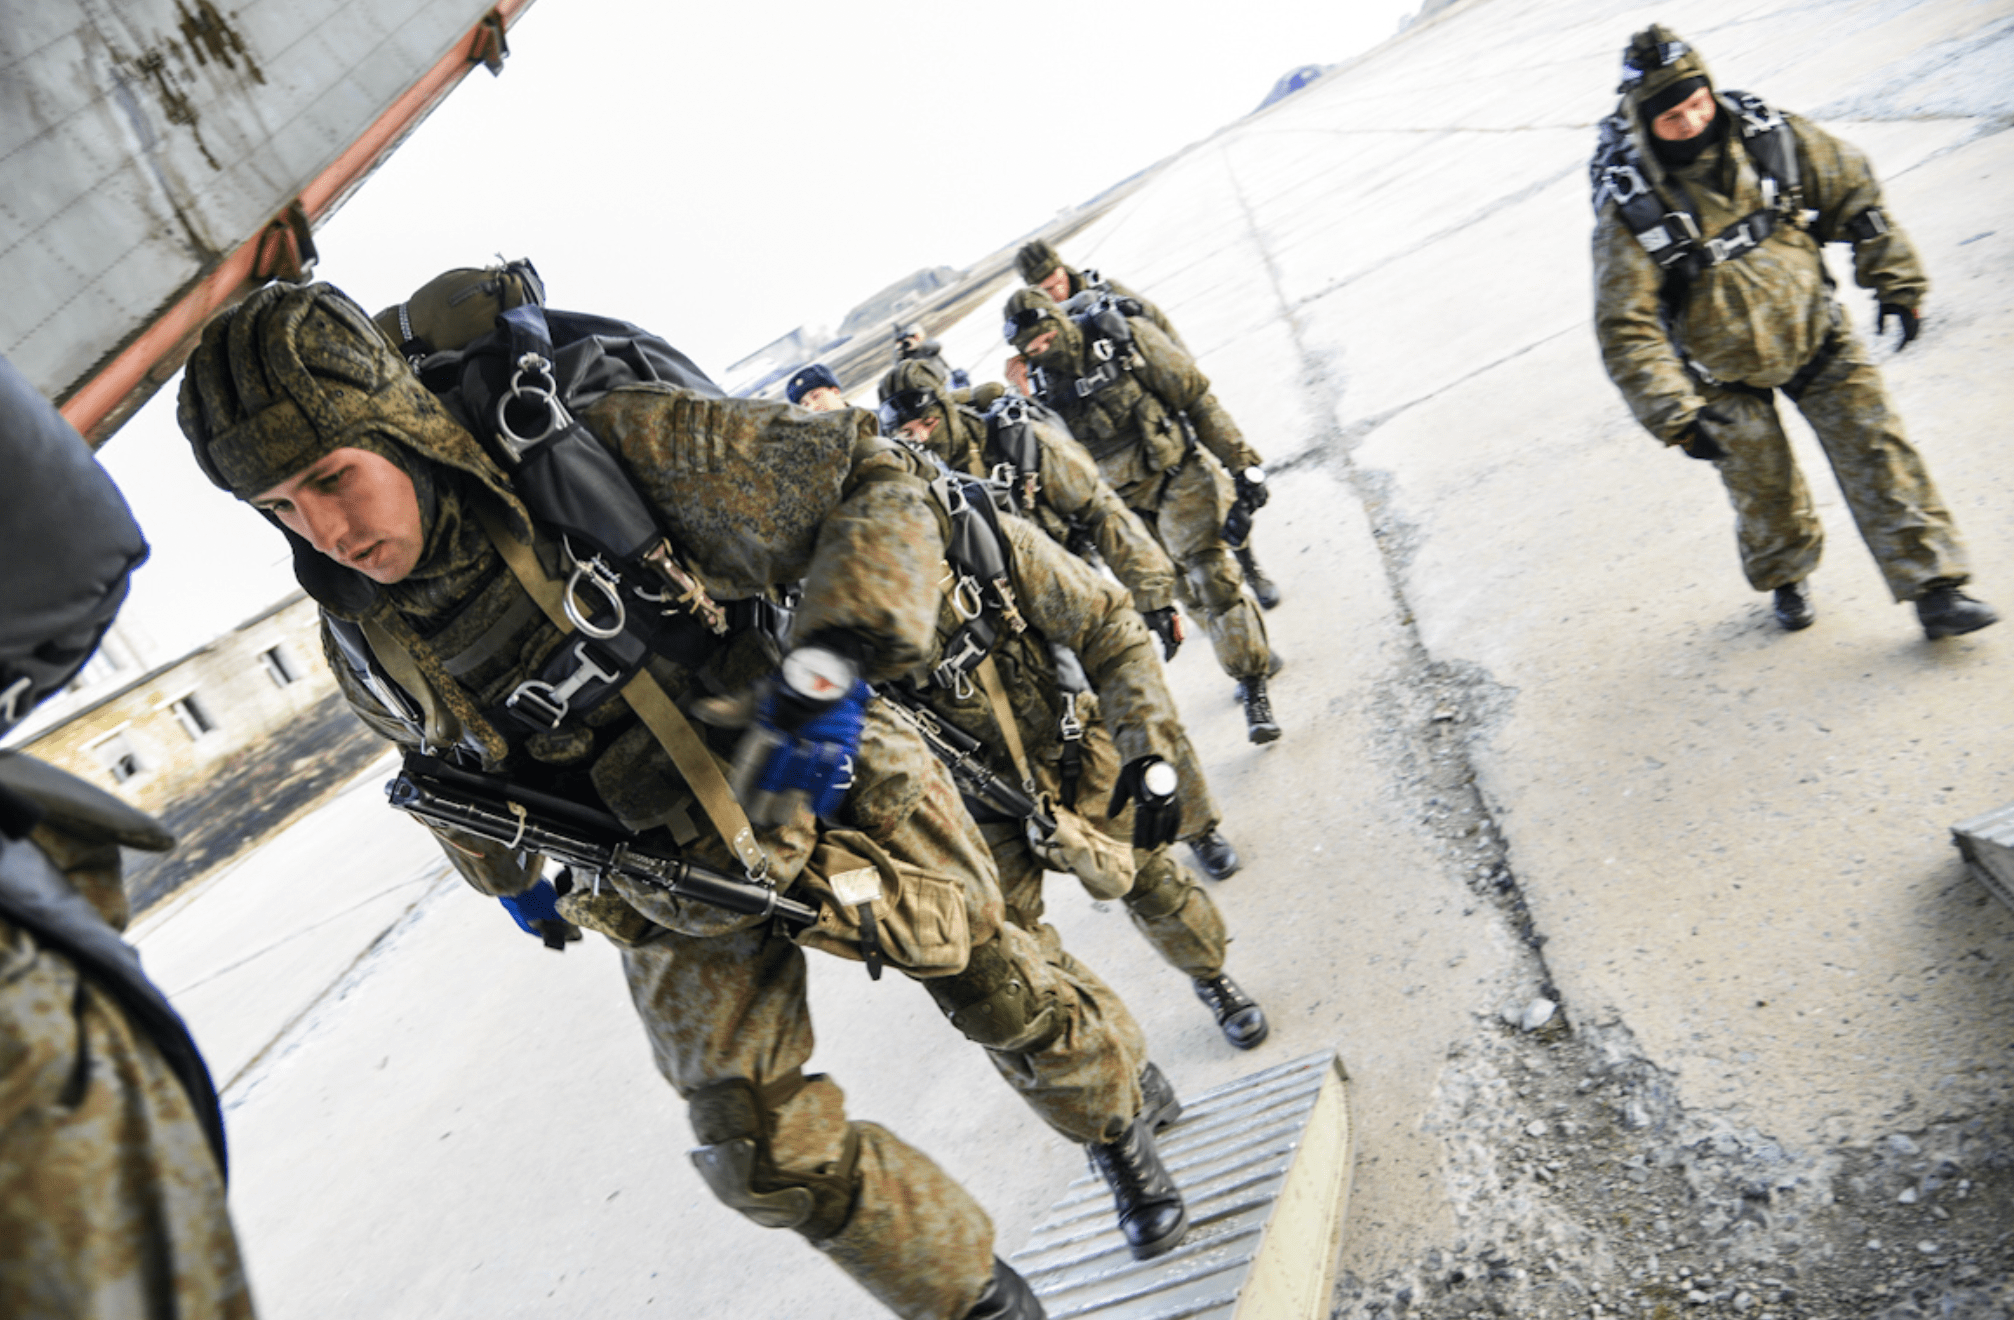 
Paratroopers of the 83rd separate air assault brigade with Arbalet-2 parachute systems enter an Il-76 during the active phase of a tactical exercise with an airborne formation in Ussuriysk. Wikimedia Commons.